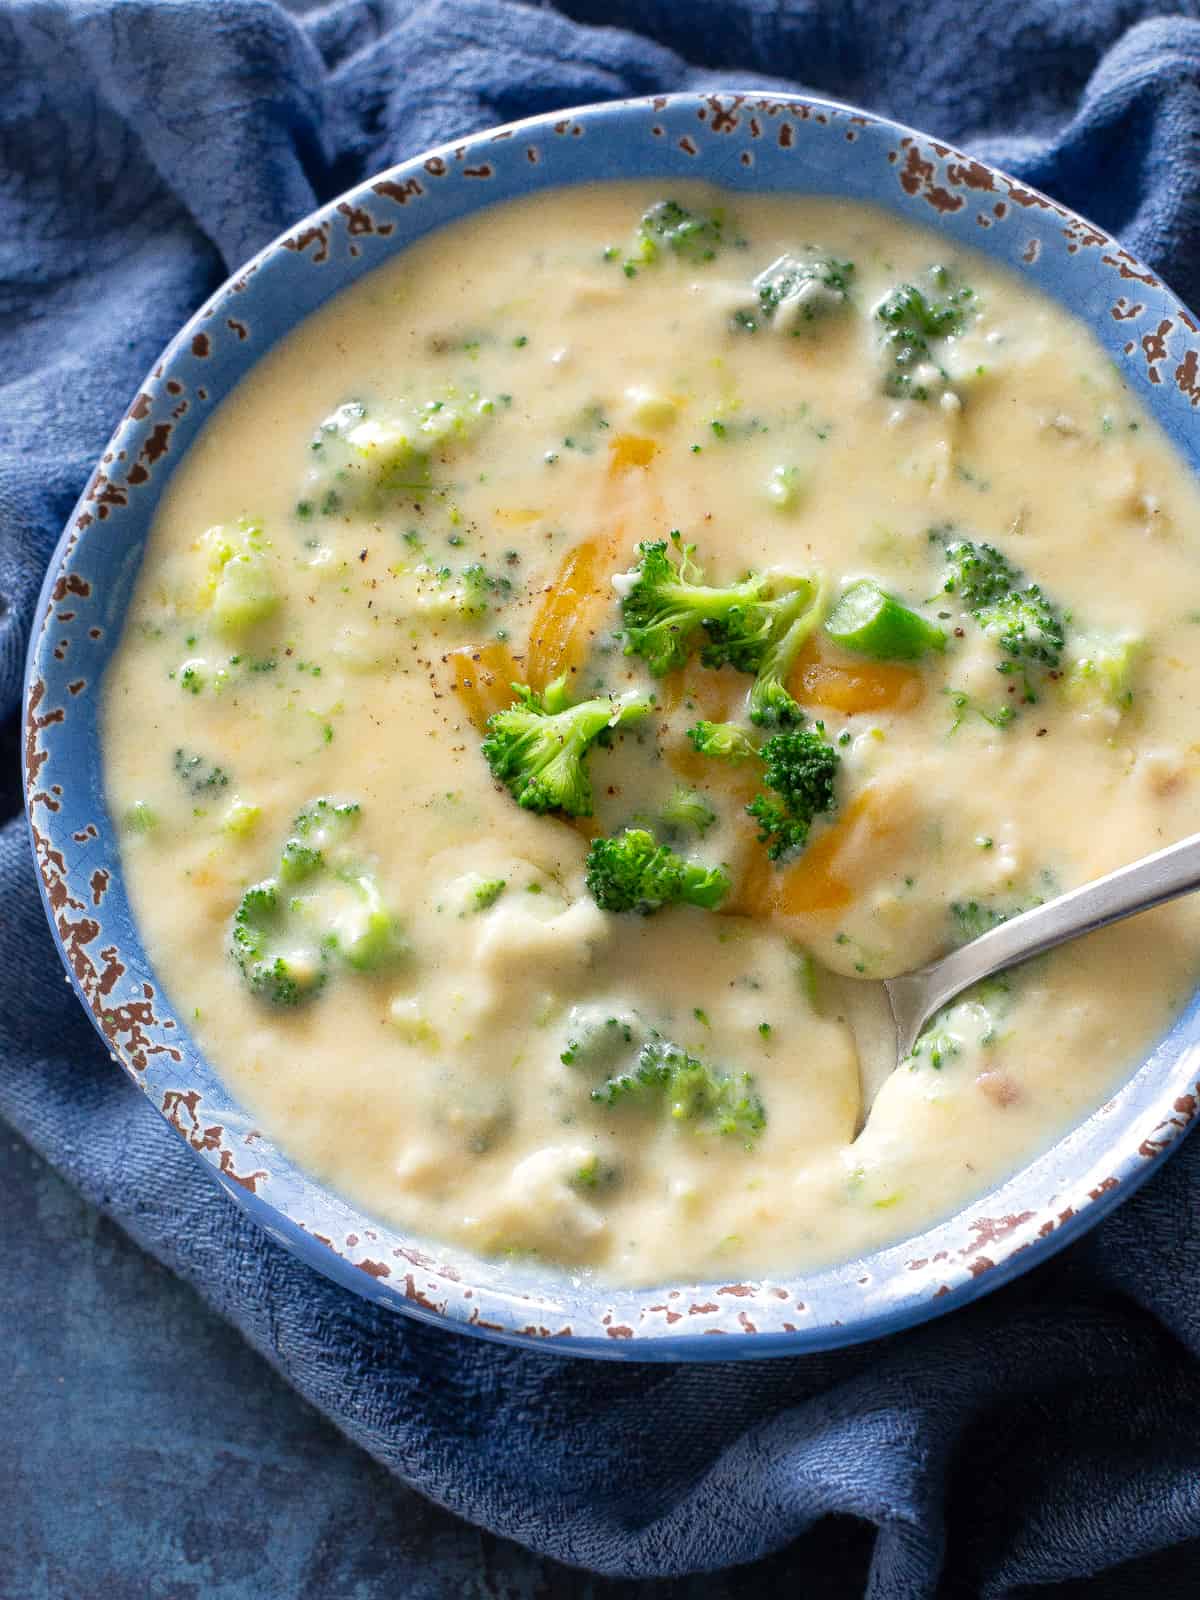 https://www.the-girl-who-ate-everything.com/wp-content/uploads/2011/11/broccoli-cheese-soup-20.jpg